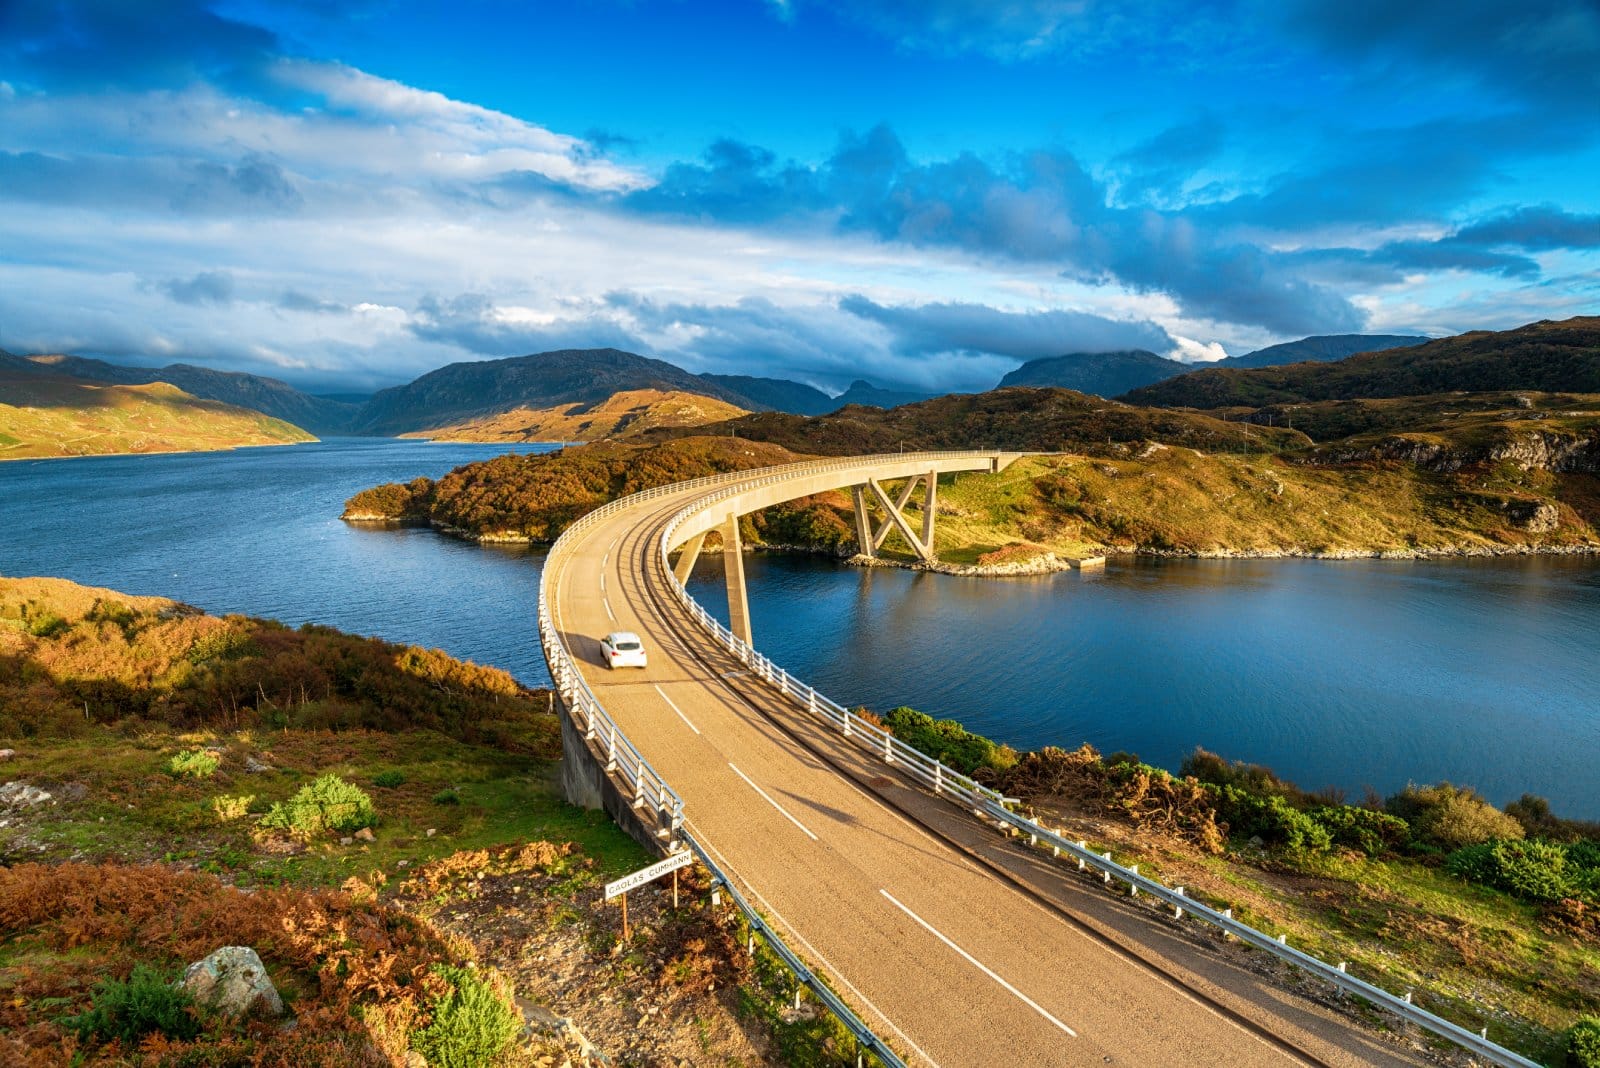 <p class="wp-caption-text">Image Credit: Shutterstock / Helen Hotson</p>  <p><span>Scotland’s answer to Route 66, the North Coast 500, winds through the Scottish Highlands, showcasing fairy-tale castles, secluded beaches, and dramatic moors.</span></p>